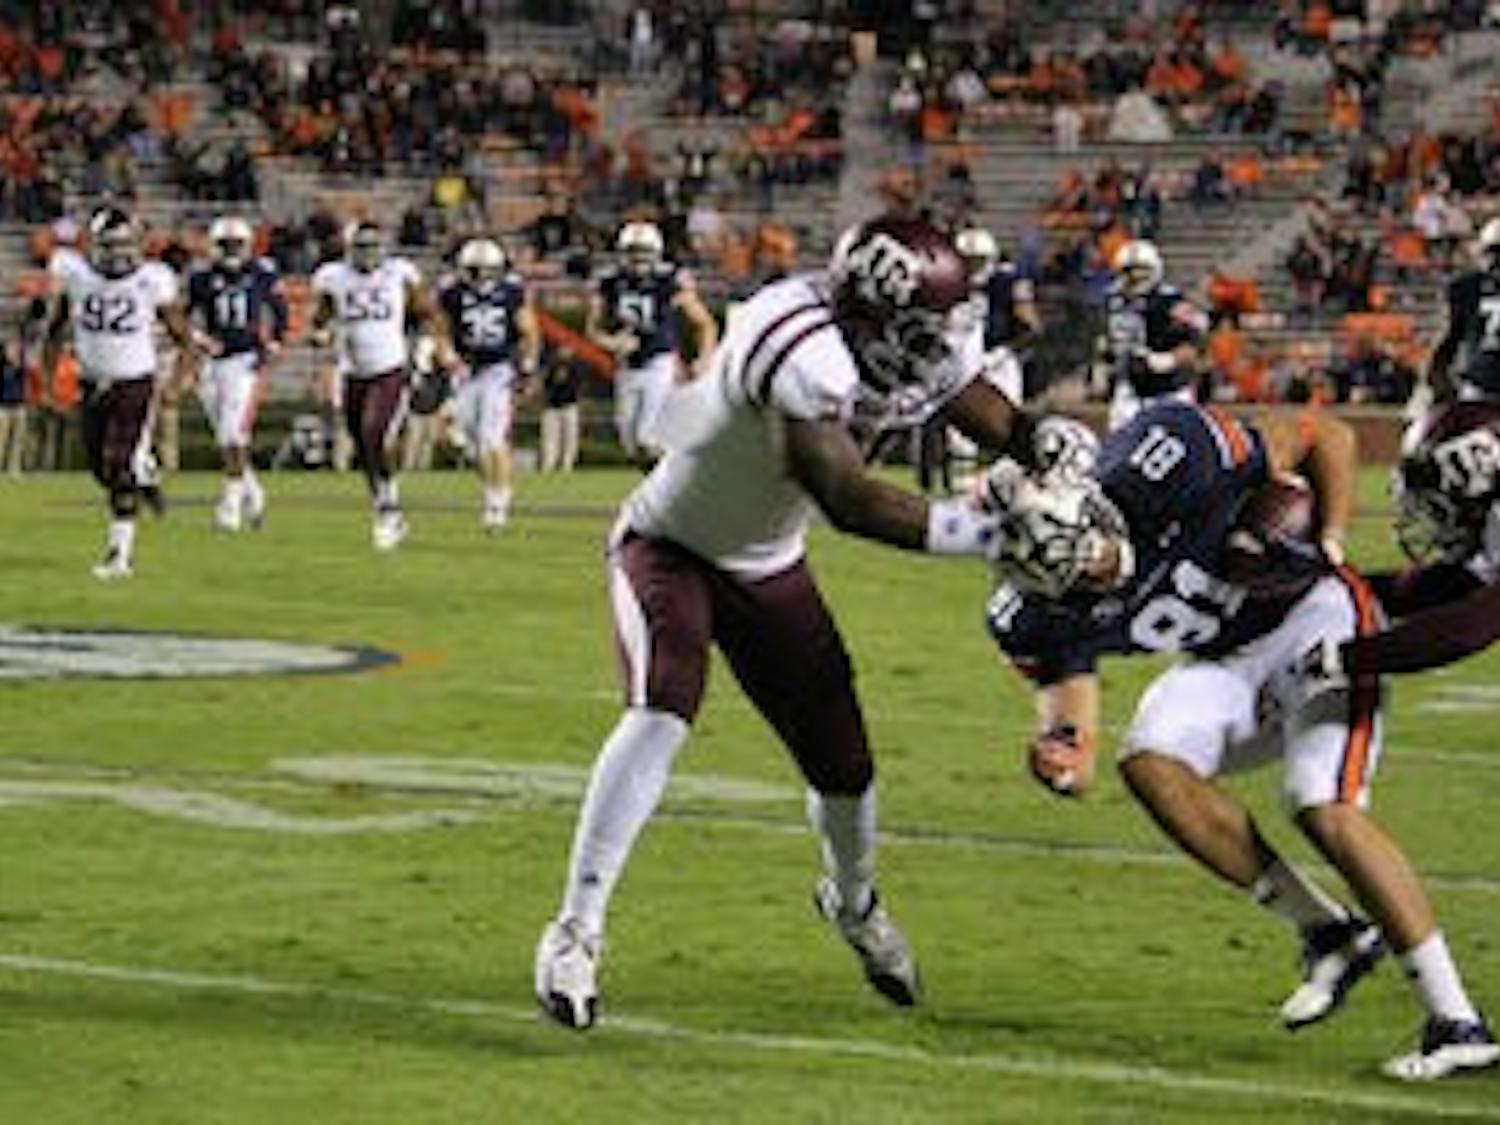 Wide receiver C.J. Uzomah is tackled by the Texas A&M defense. (Rebecca Croomes / PHOTO EDITOR)